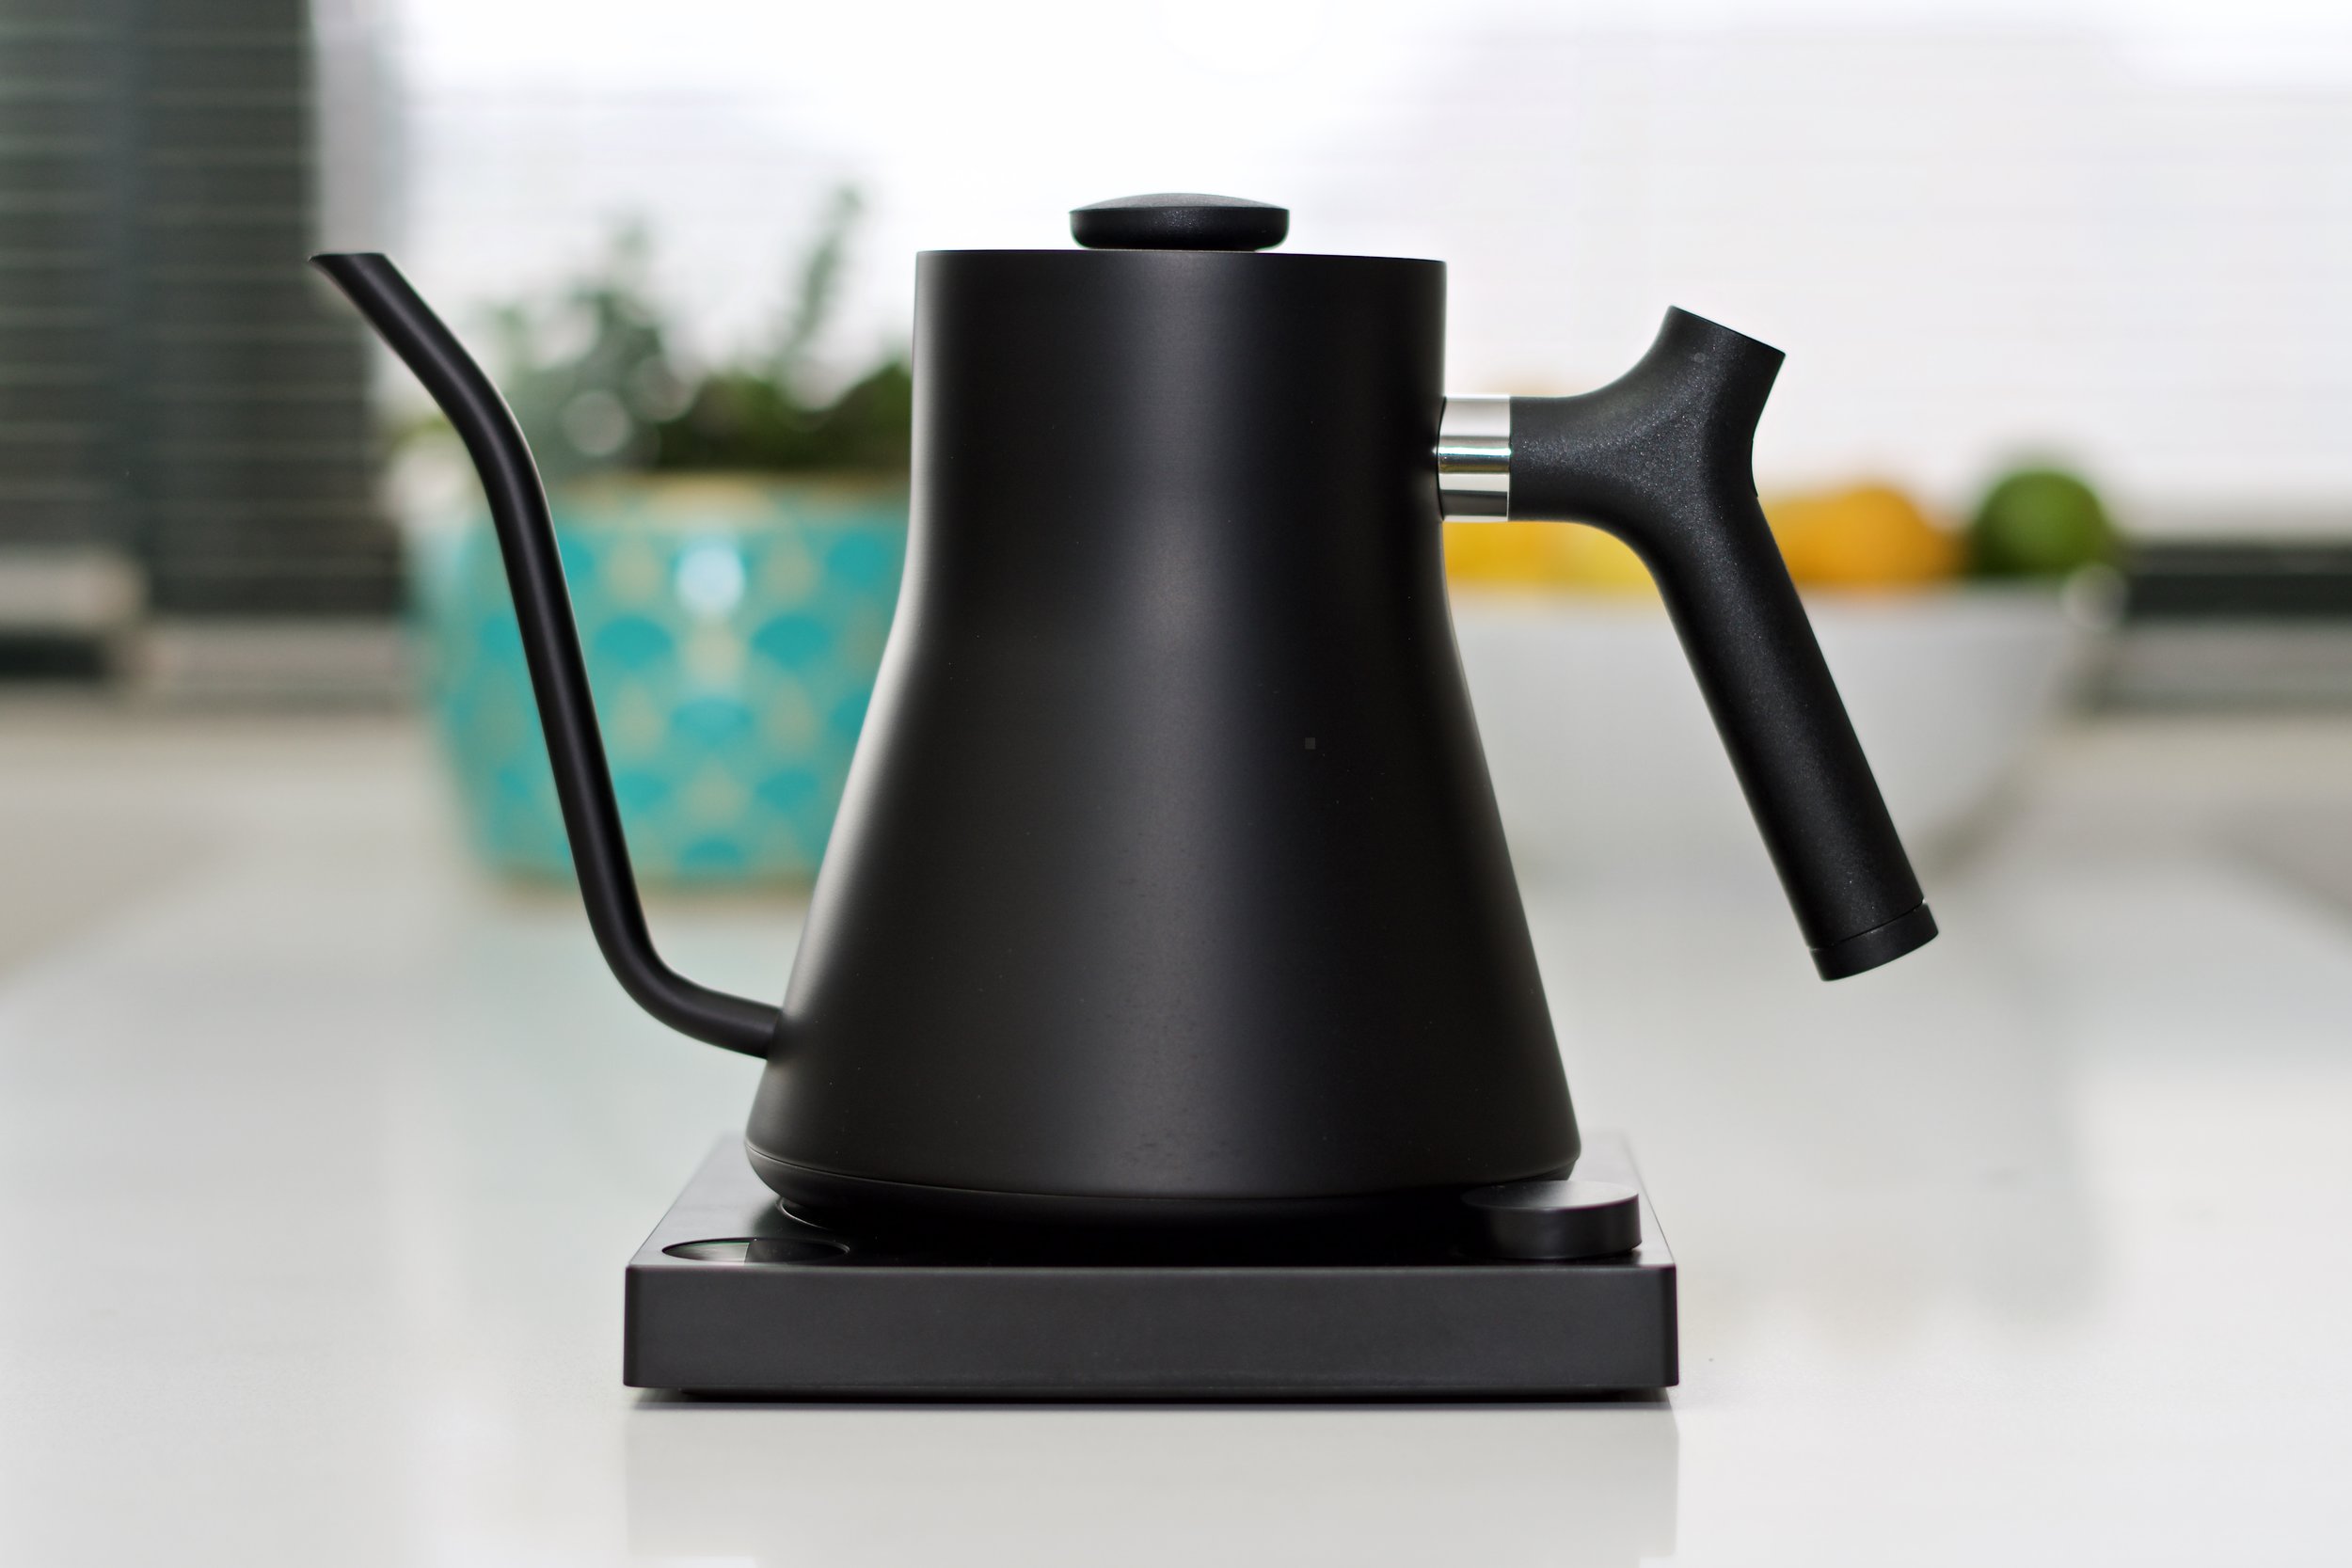 Fellow Stagg EKG Kettle Review - Is This Worth The Money?